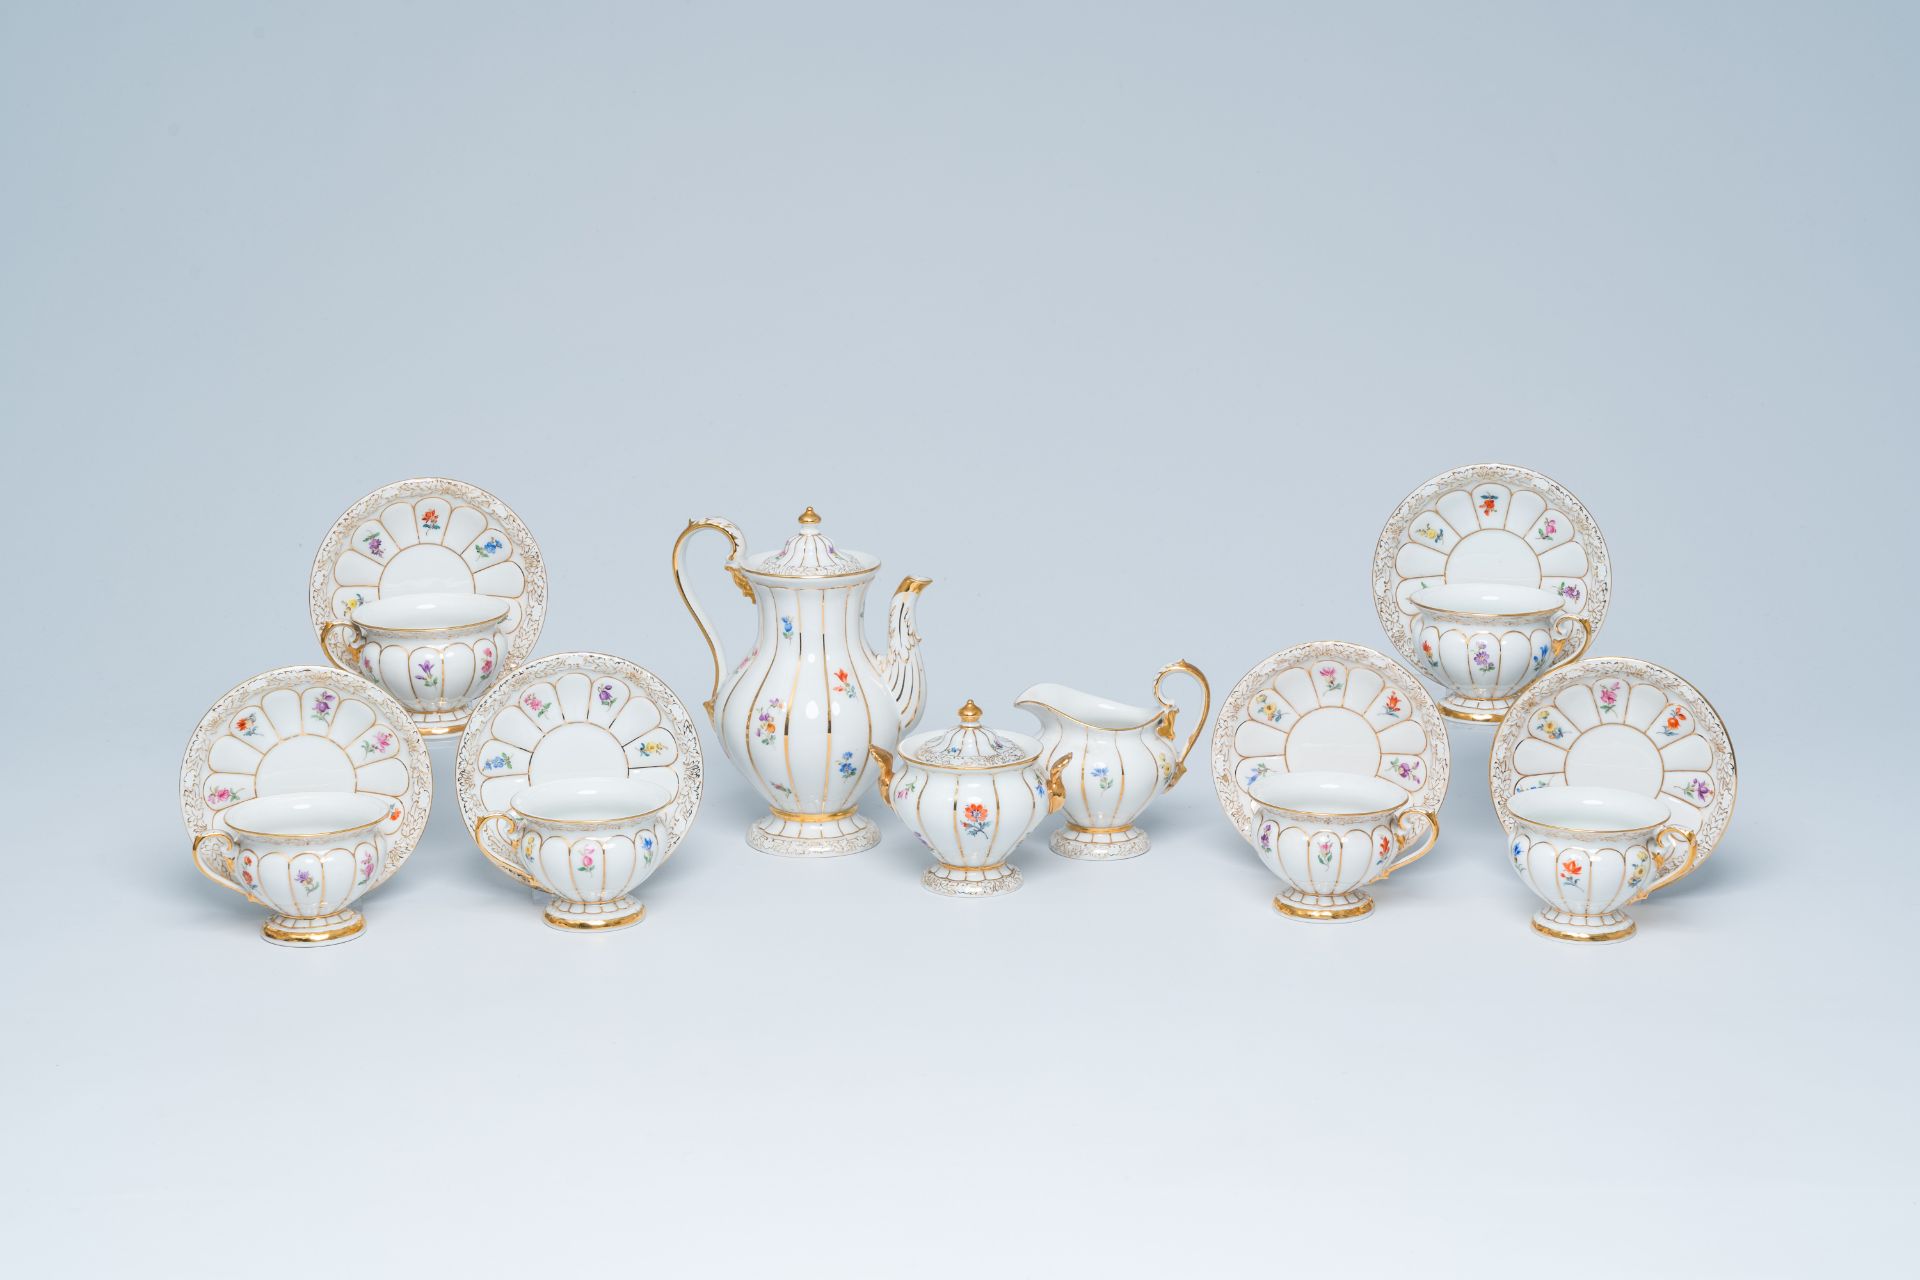 A German fifteen-piece polychrome and gilt Meissen mocha service with floral design, 20th C. - Image 2 of 10